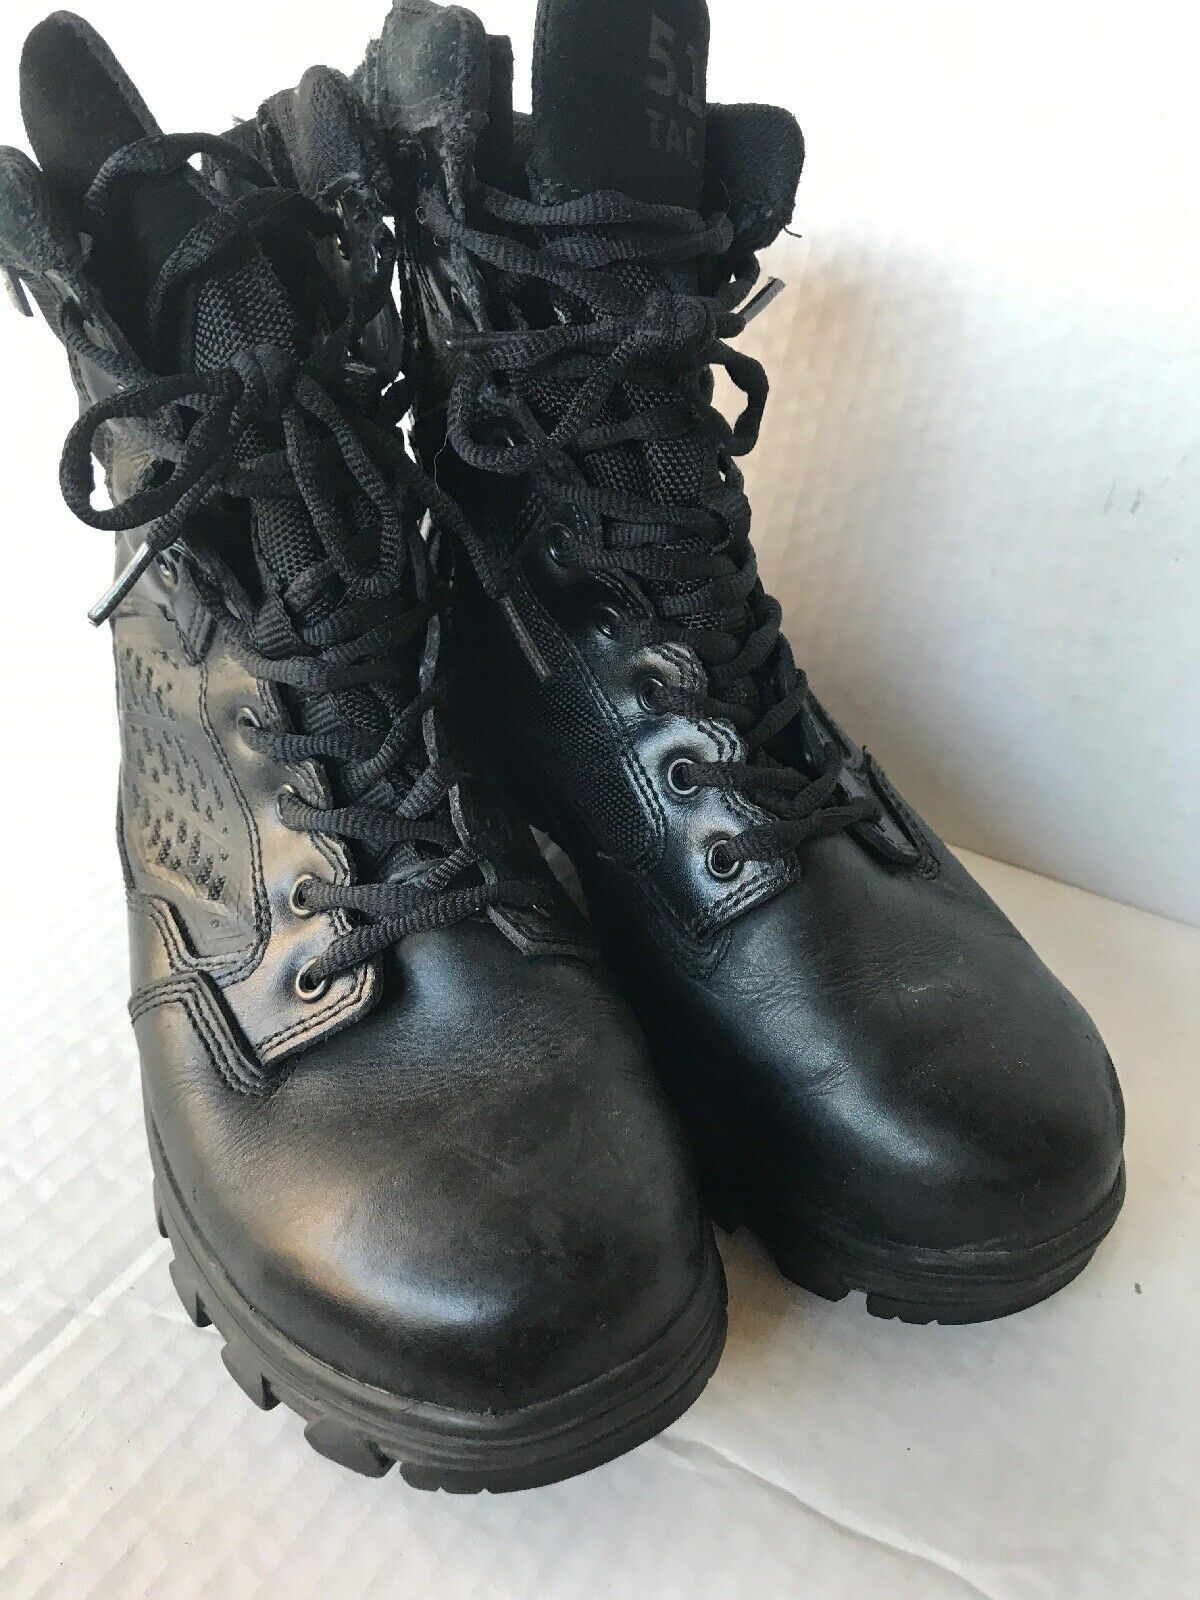 511 Tactical Military Compact 6” Boots Side and 24 similar items